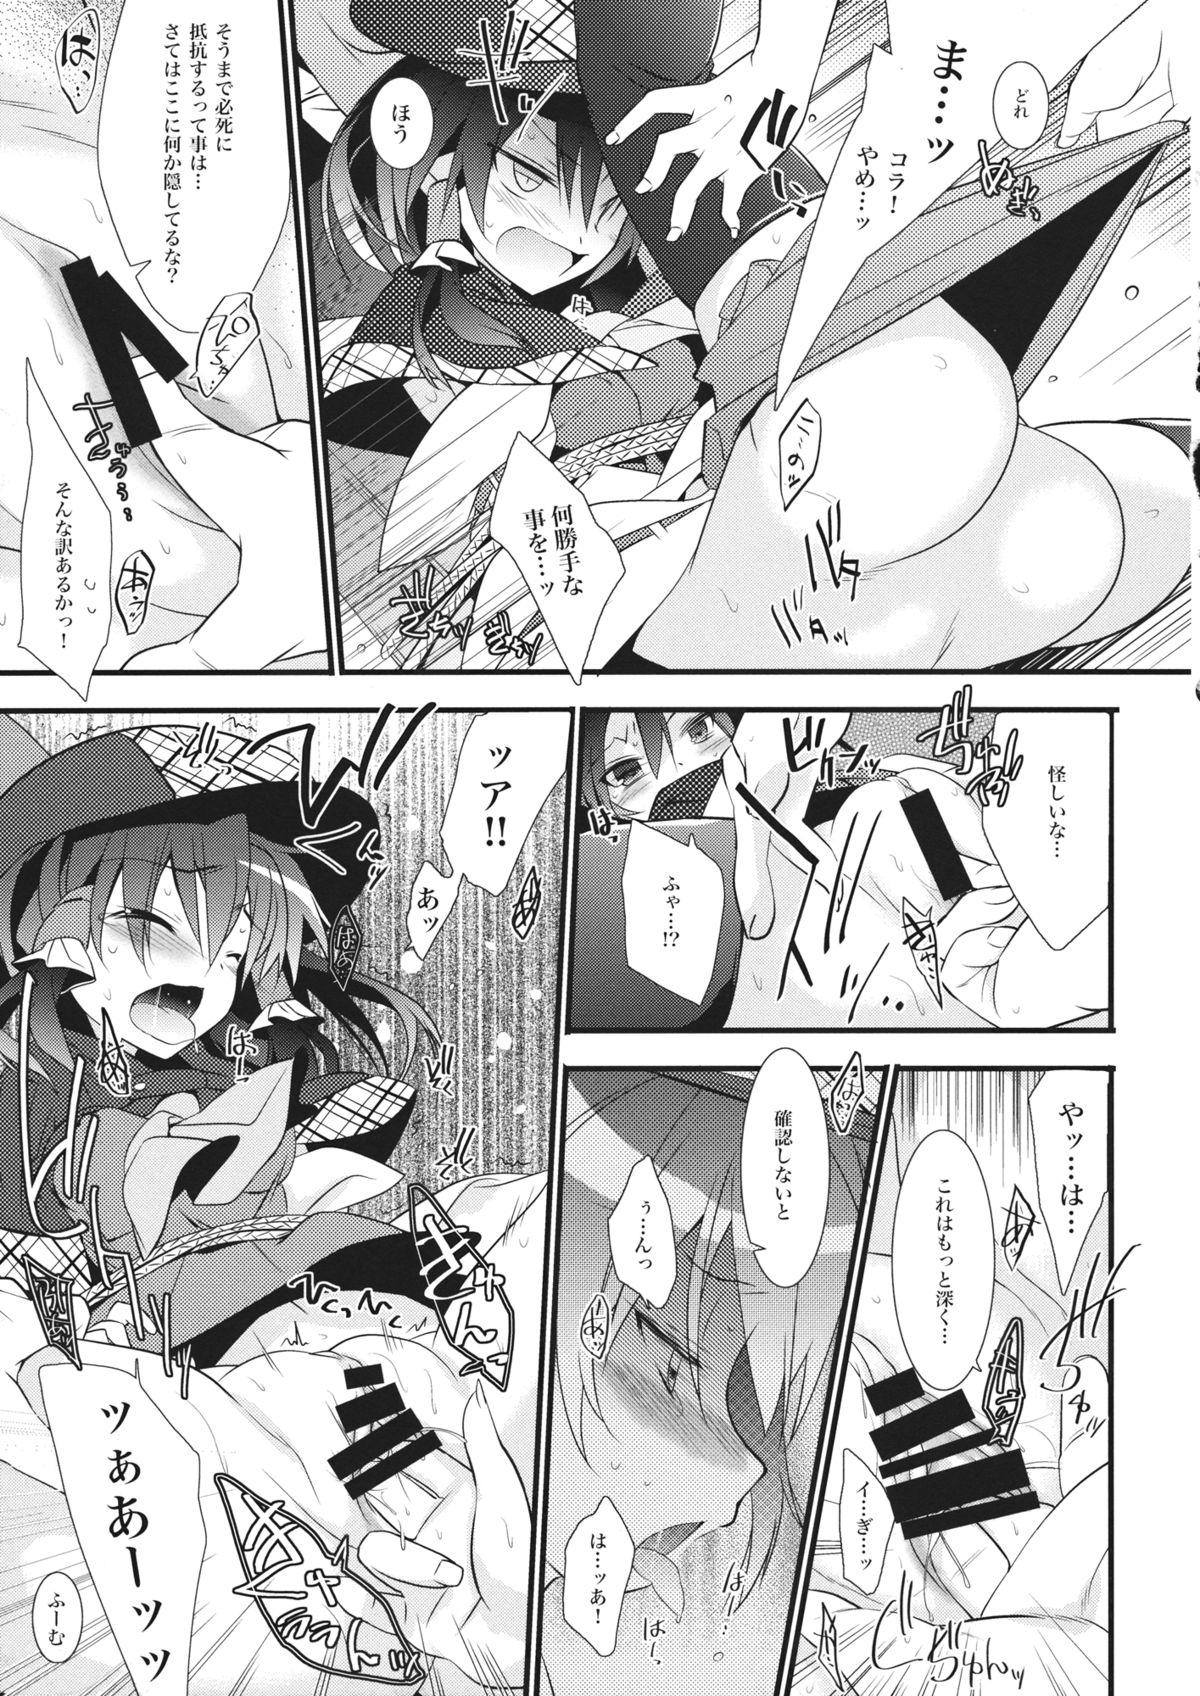 Mmf Tantei Gokko - Touhou project Interacial - Page 6